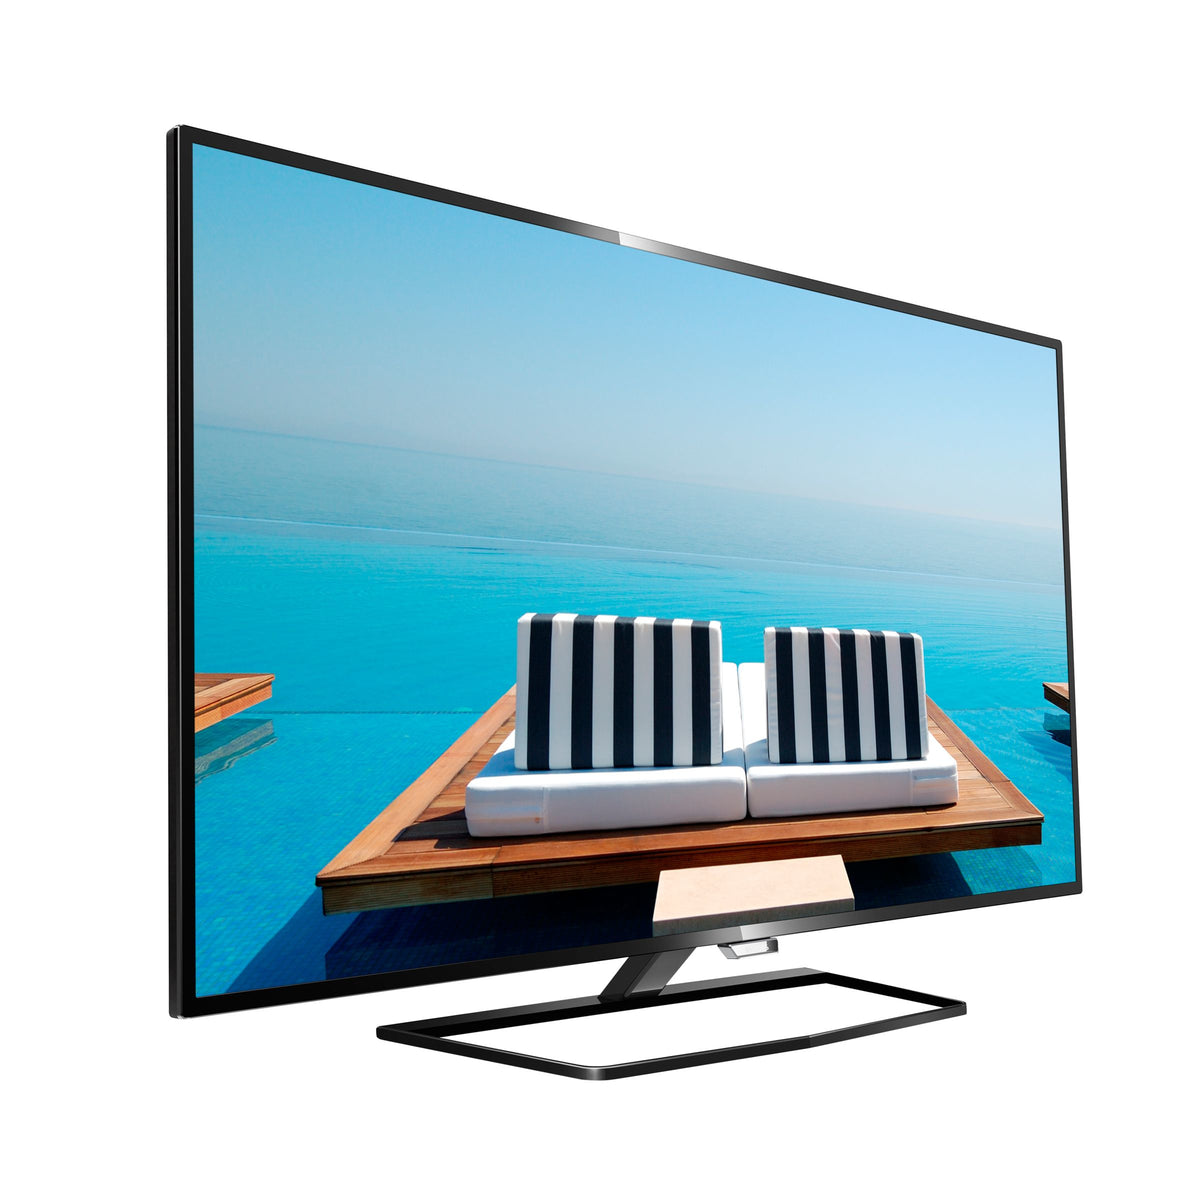 Philips 48HFL5010T - 48" Diagonal Class Professional MediaSuite LCD TV with LED Backlight - Hotel / Hospitality - Smart TV - 1080p 1920 x 1080 - Black